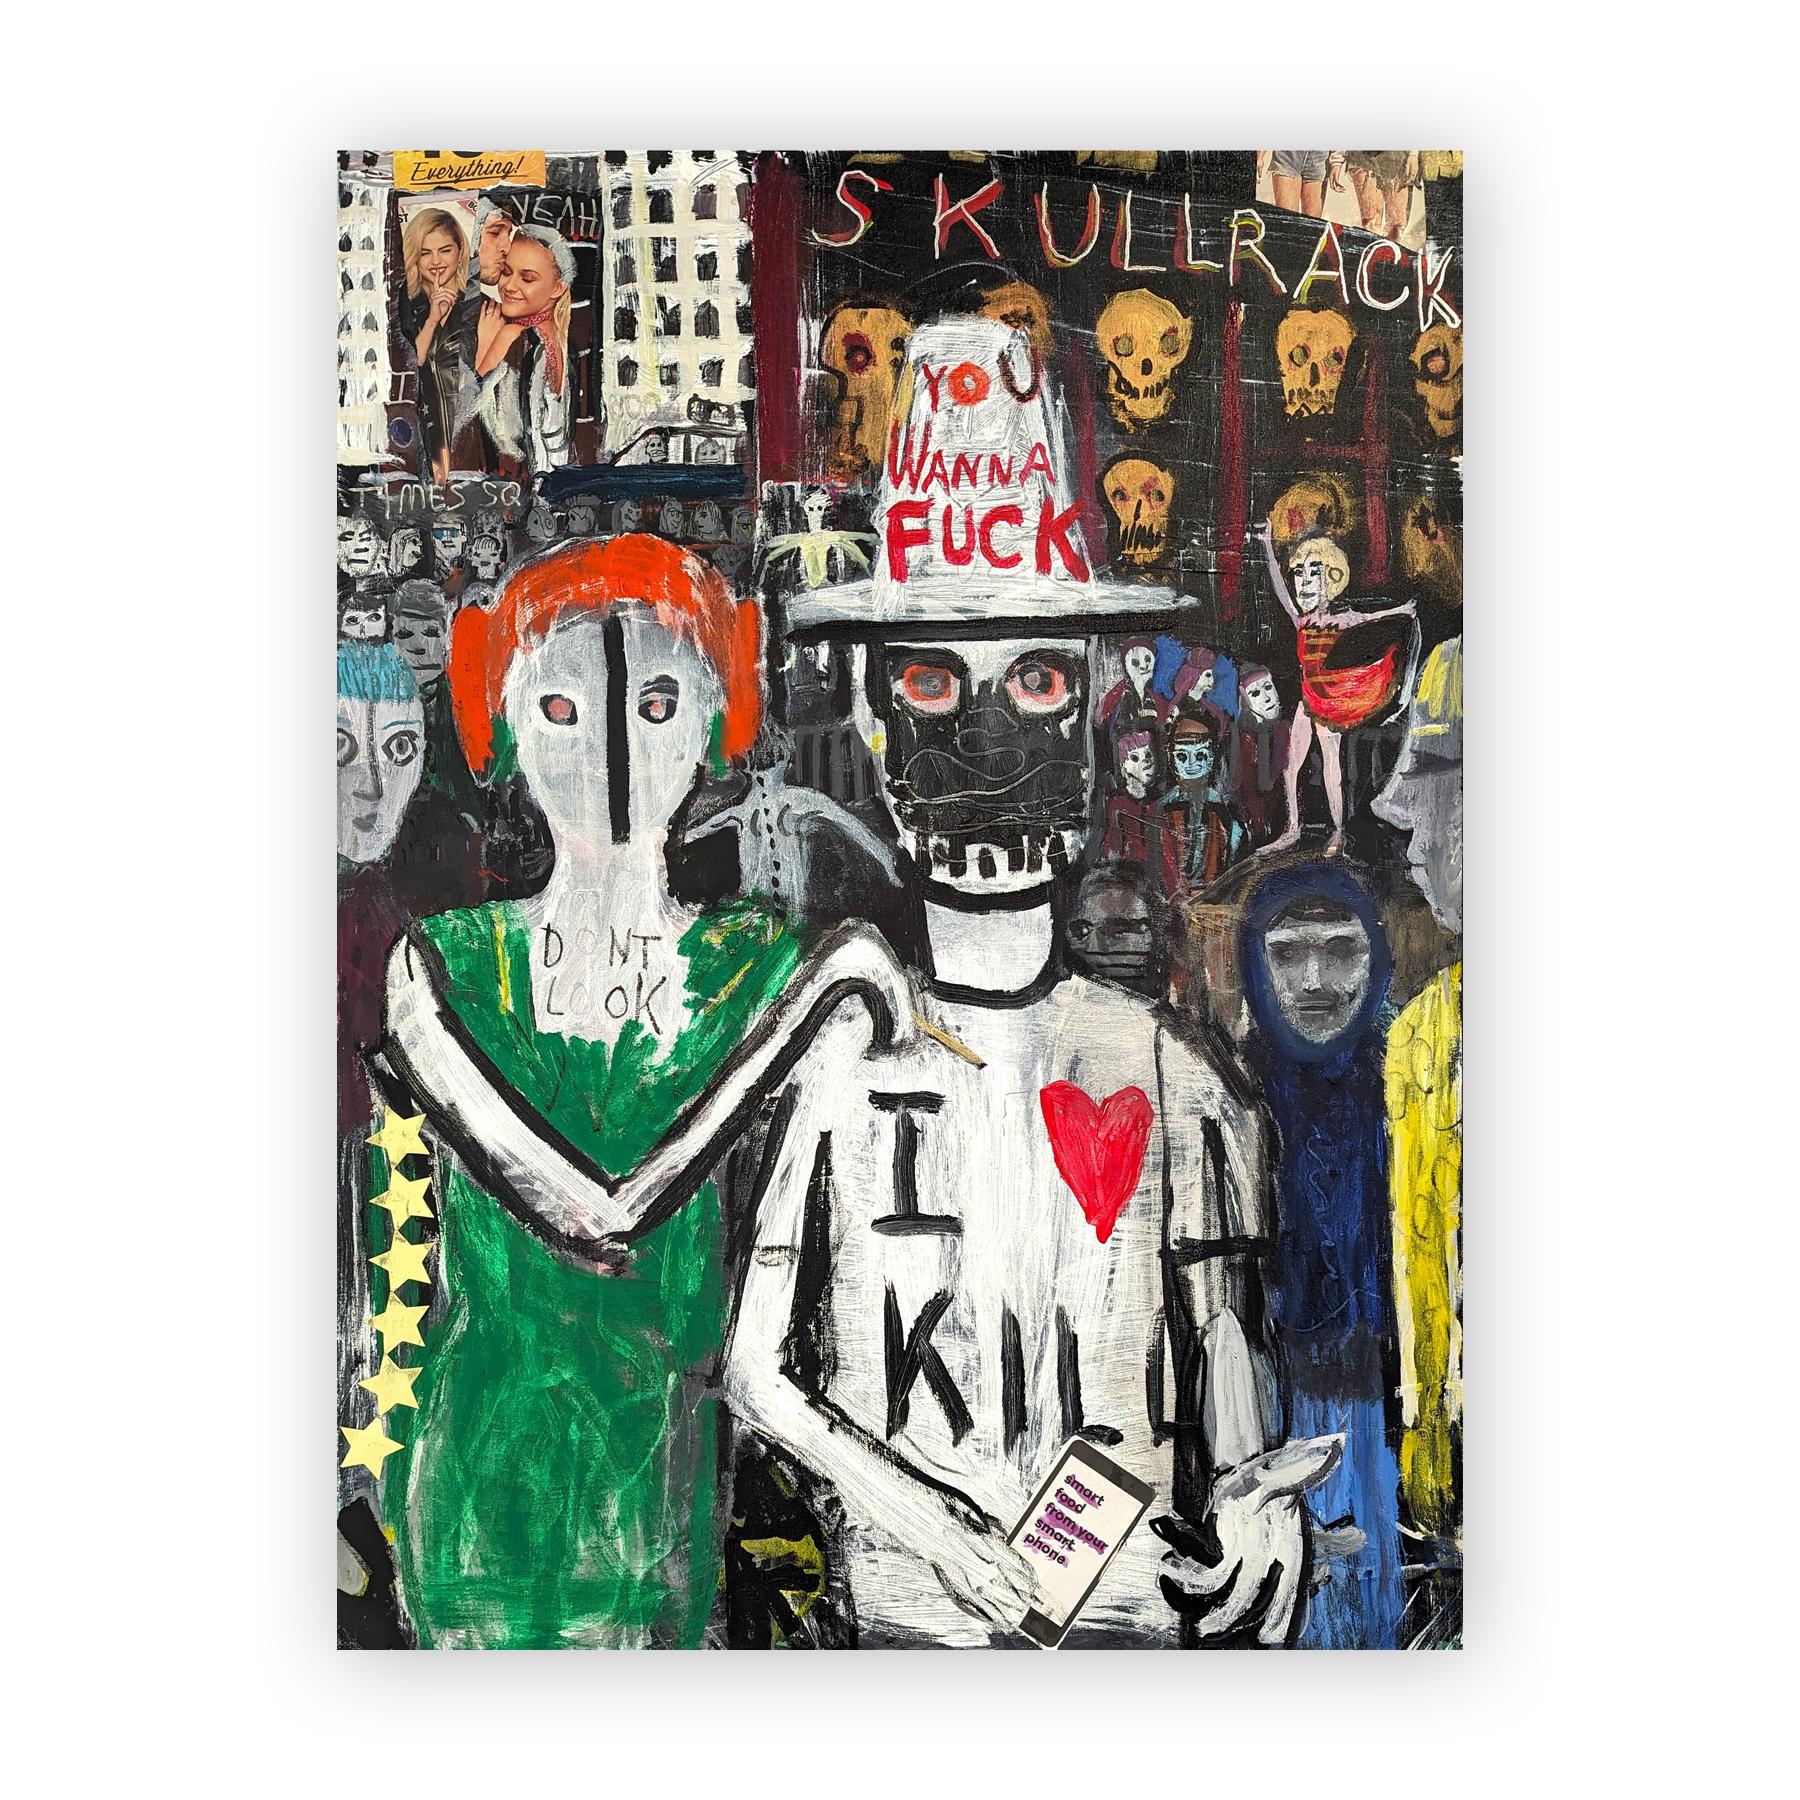 Abstract contemporary figurative painting by Houston, TX artist Mark Flood. The piece depicts two abstract figures of a woman and a man against a dark, grungy background with figures and skulls. The artist signed the piece on the back of the canvas.